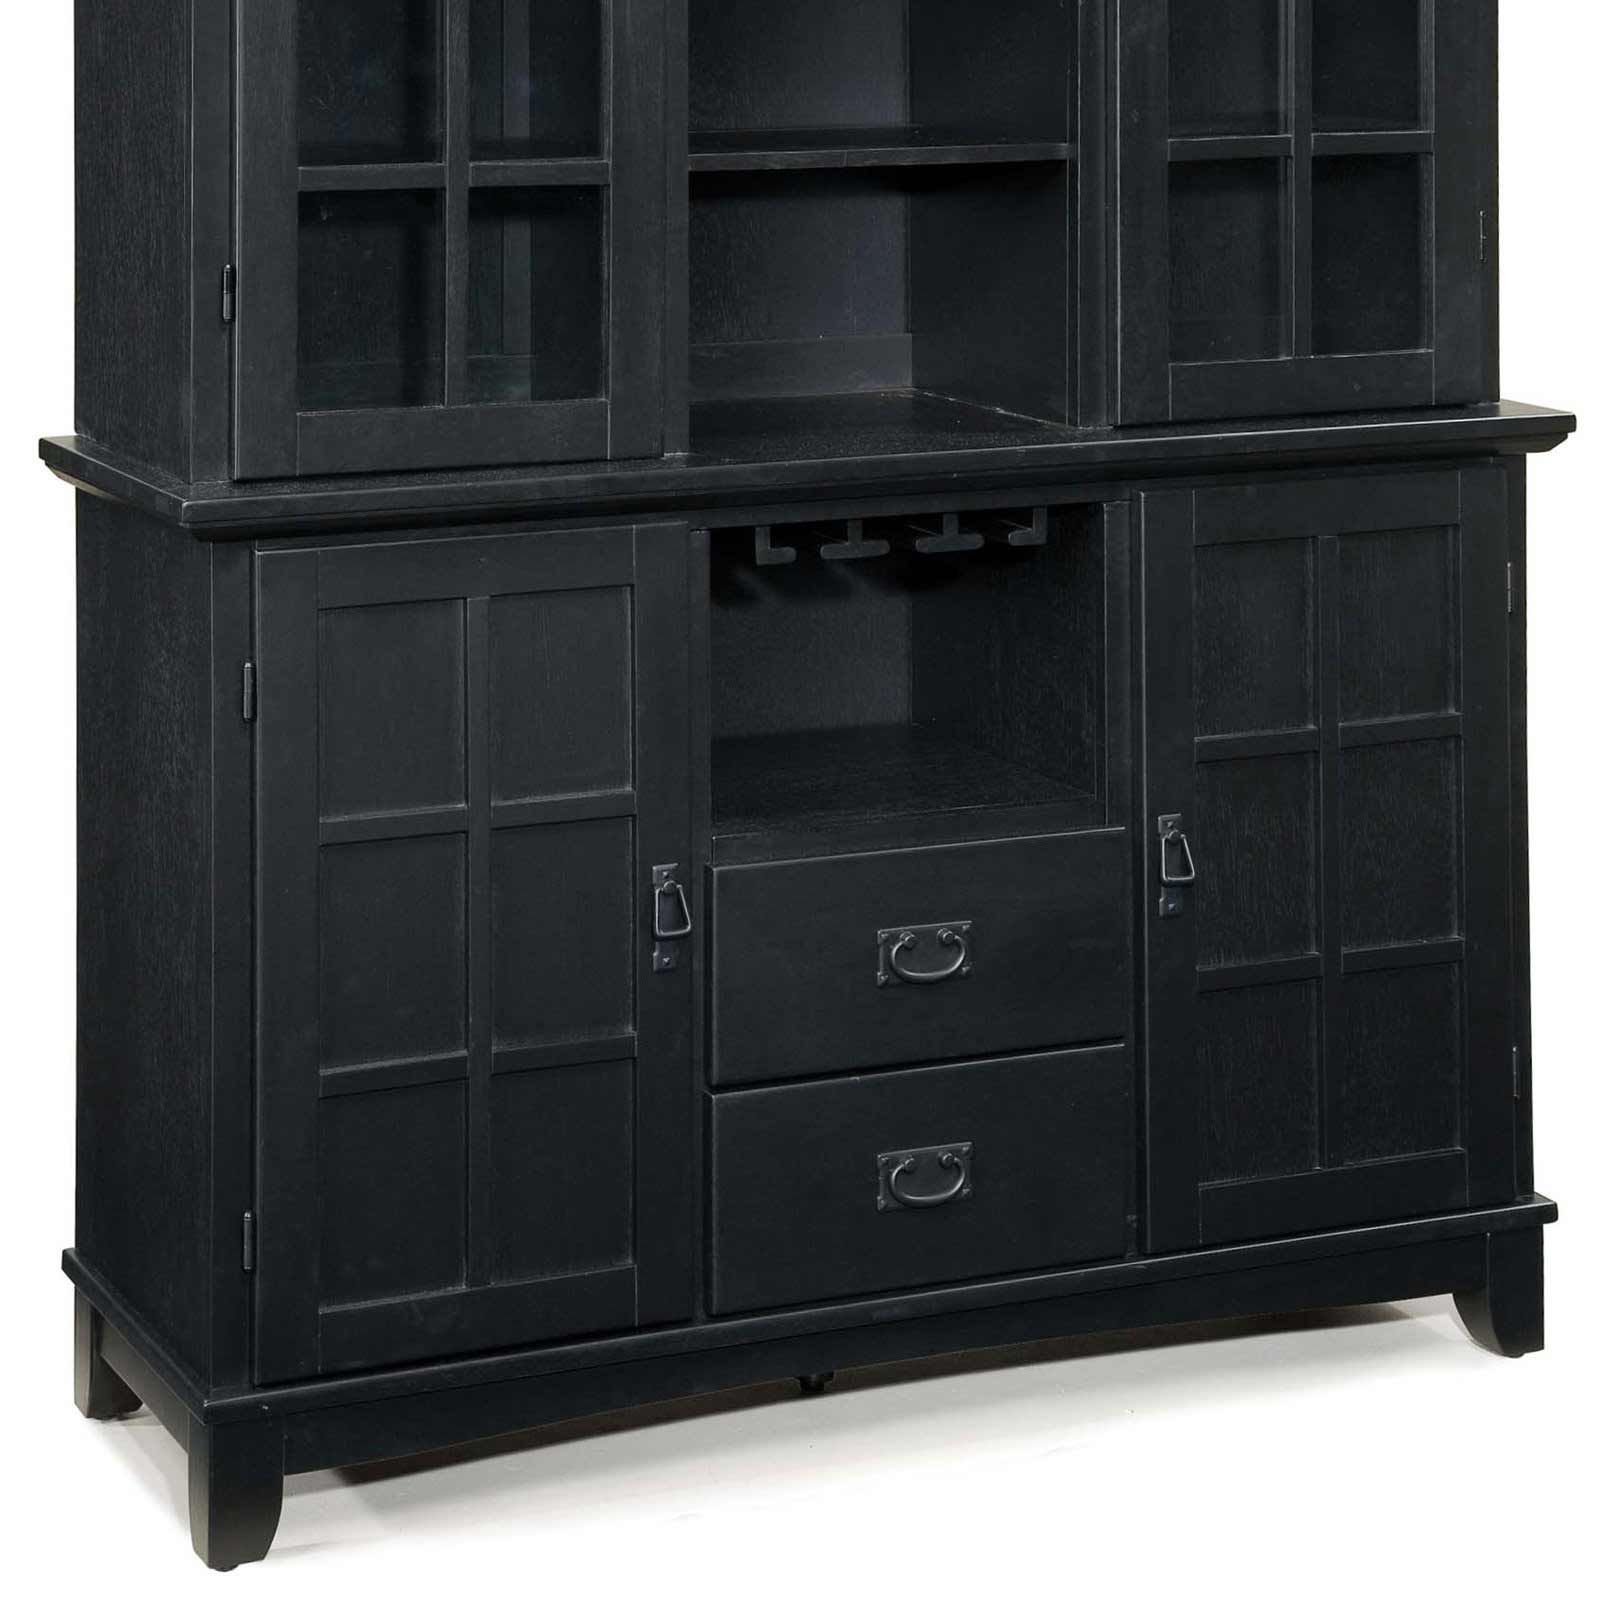 Home Styles Black Buffet With Stainless Top Hutch 5100 Pizza Pertaining To Black Hutch Buffets With Stainless Top (View 9 of 30)